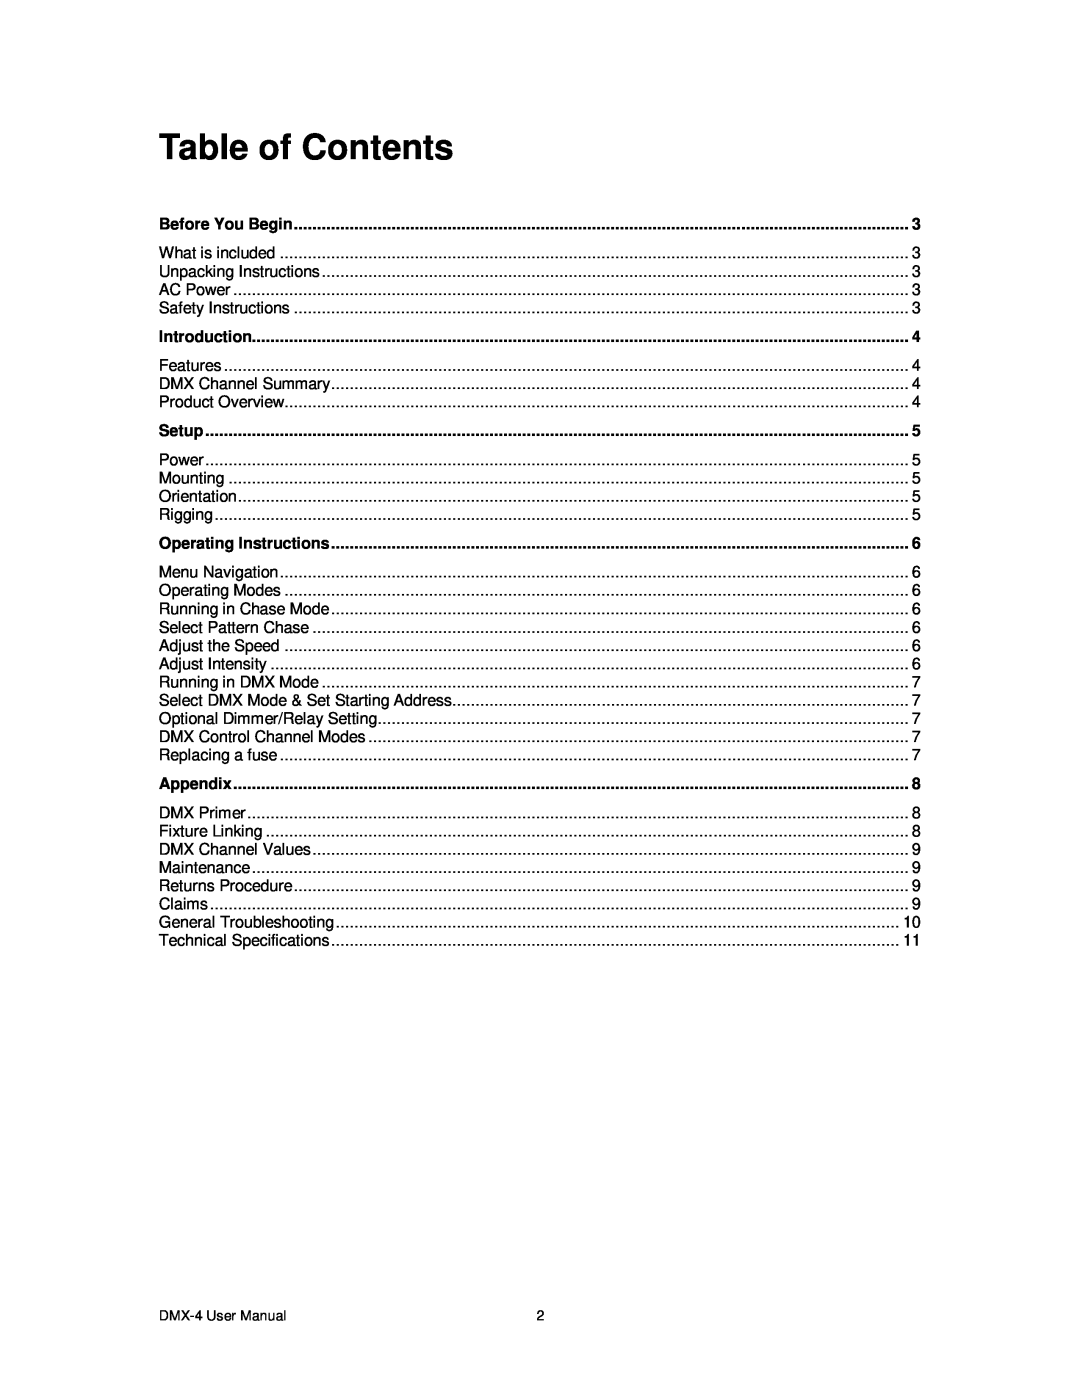 Chauvet DMX-4 user manual Table of Contents, Before You Begin, Introduction, Setup, Operating Instructions, Appendix 